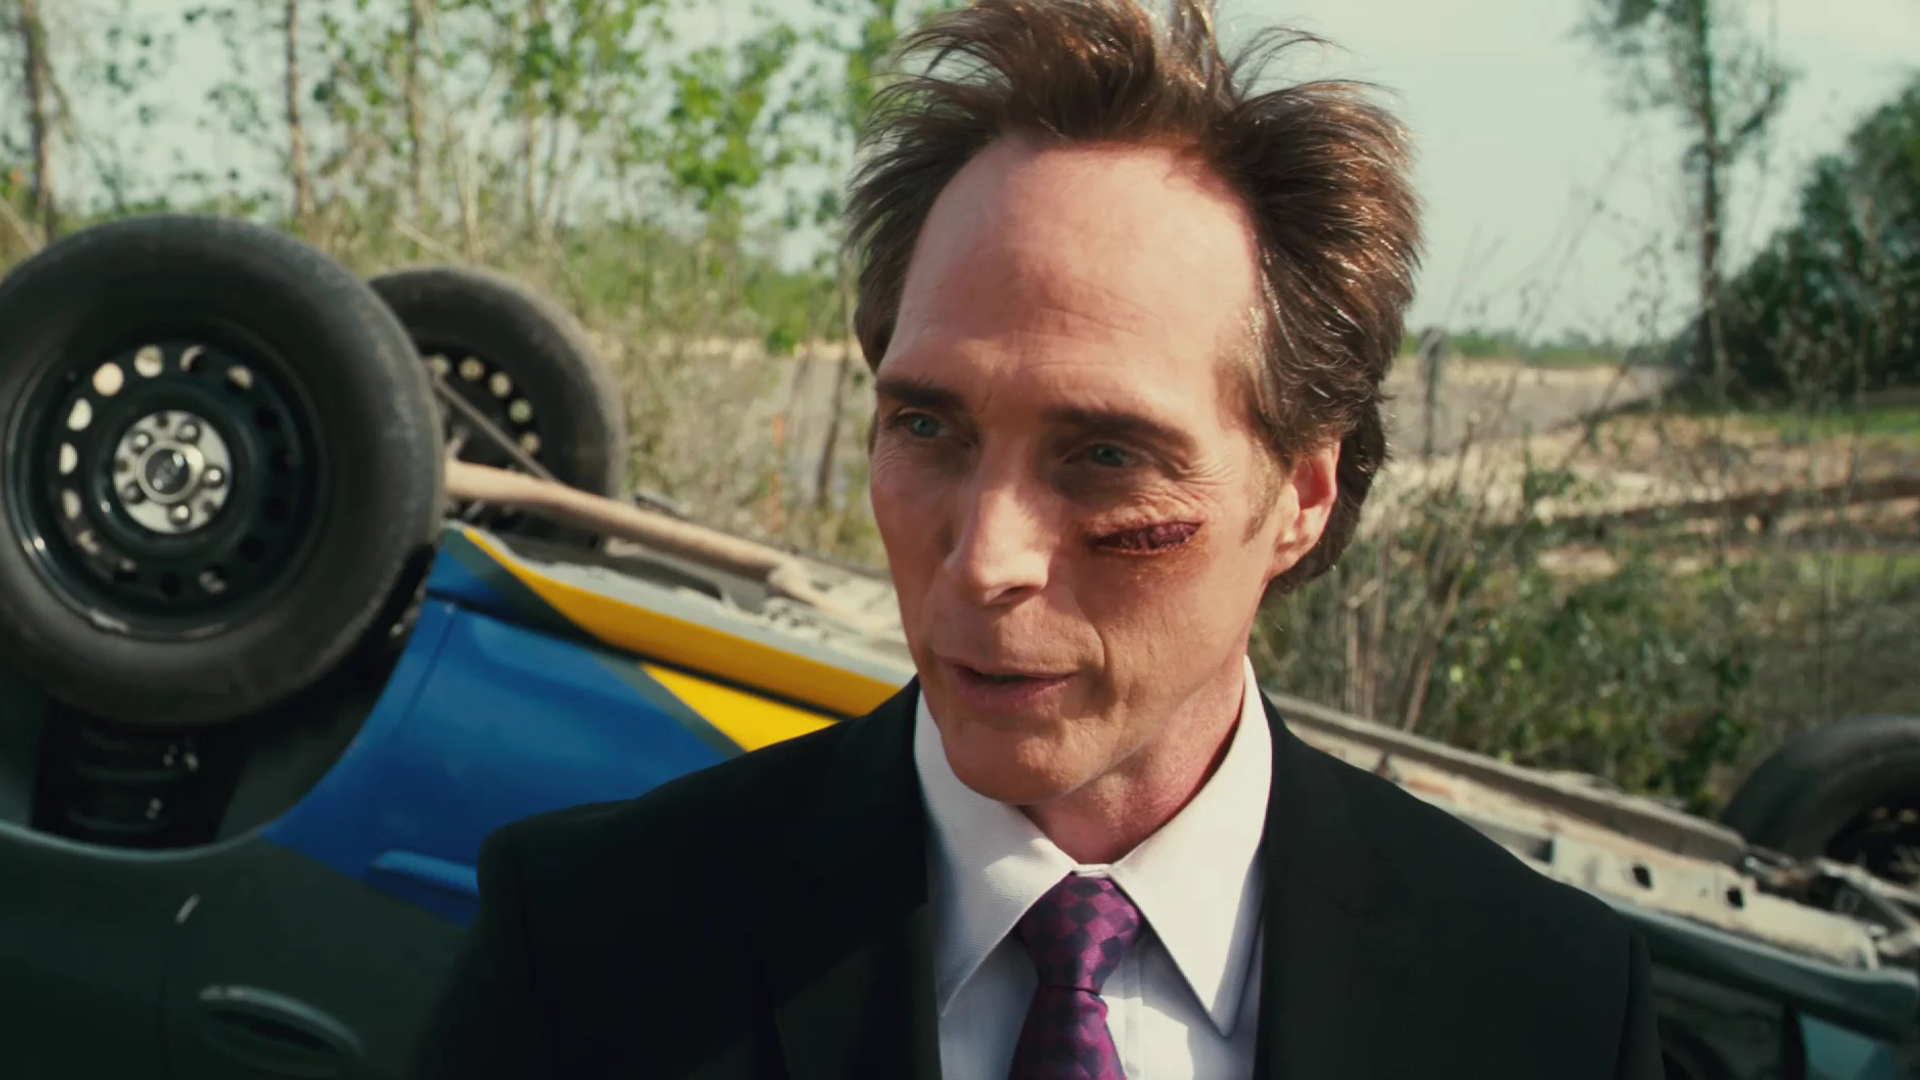 William Fichtner as The Accountant, by far the best part of this film. 